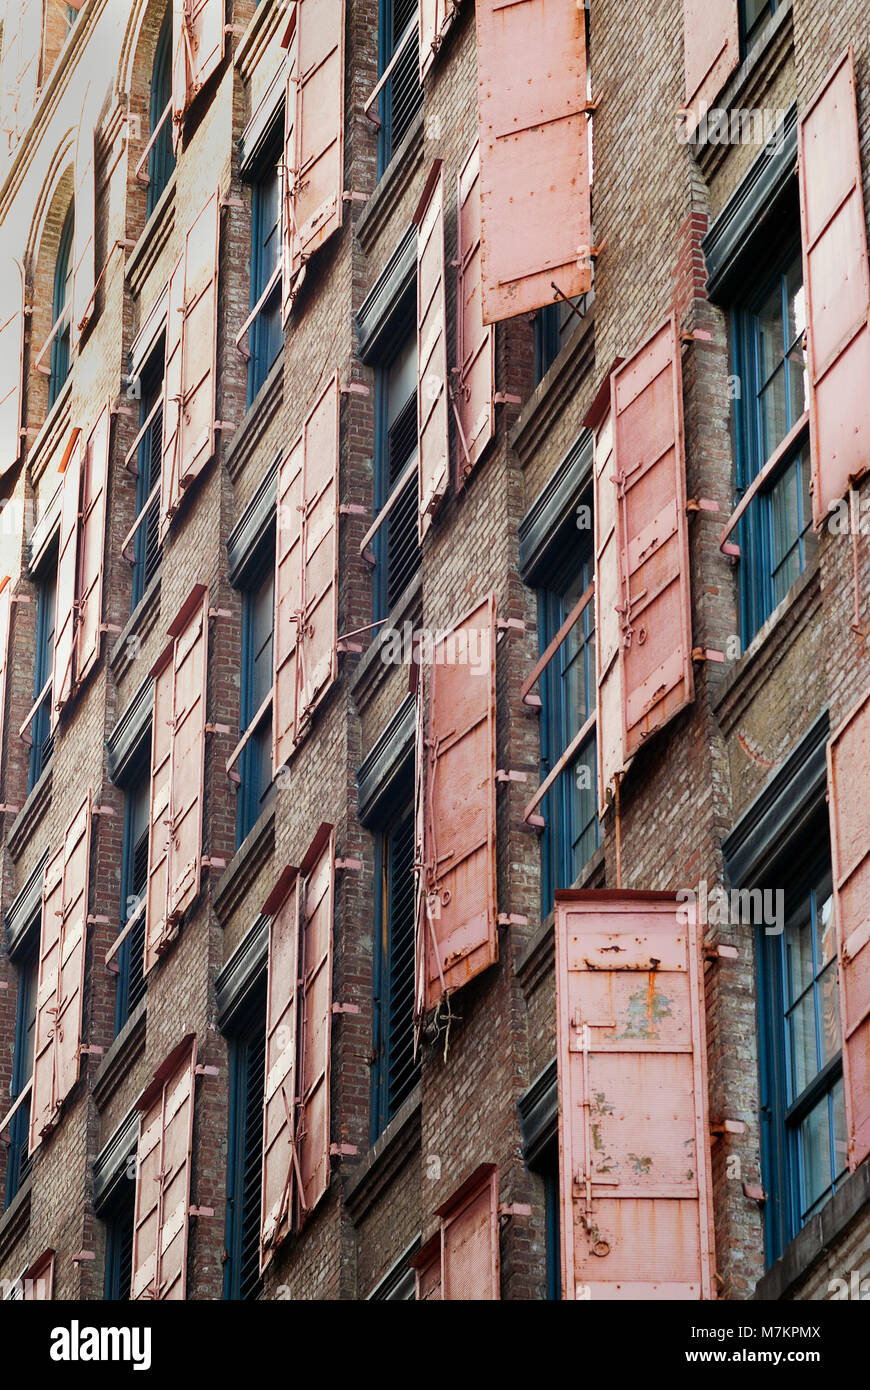 Storm shutters on a building in SoHo, New York Stock Photo